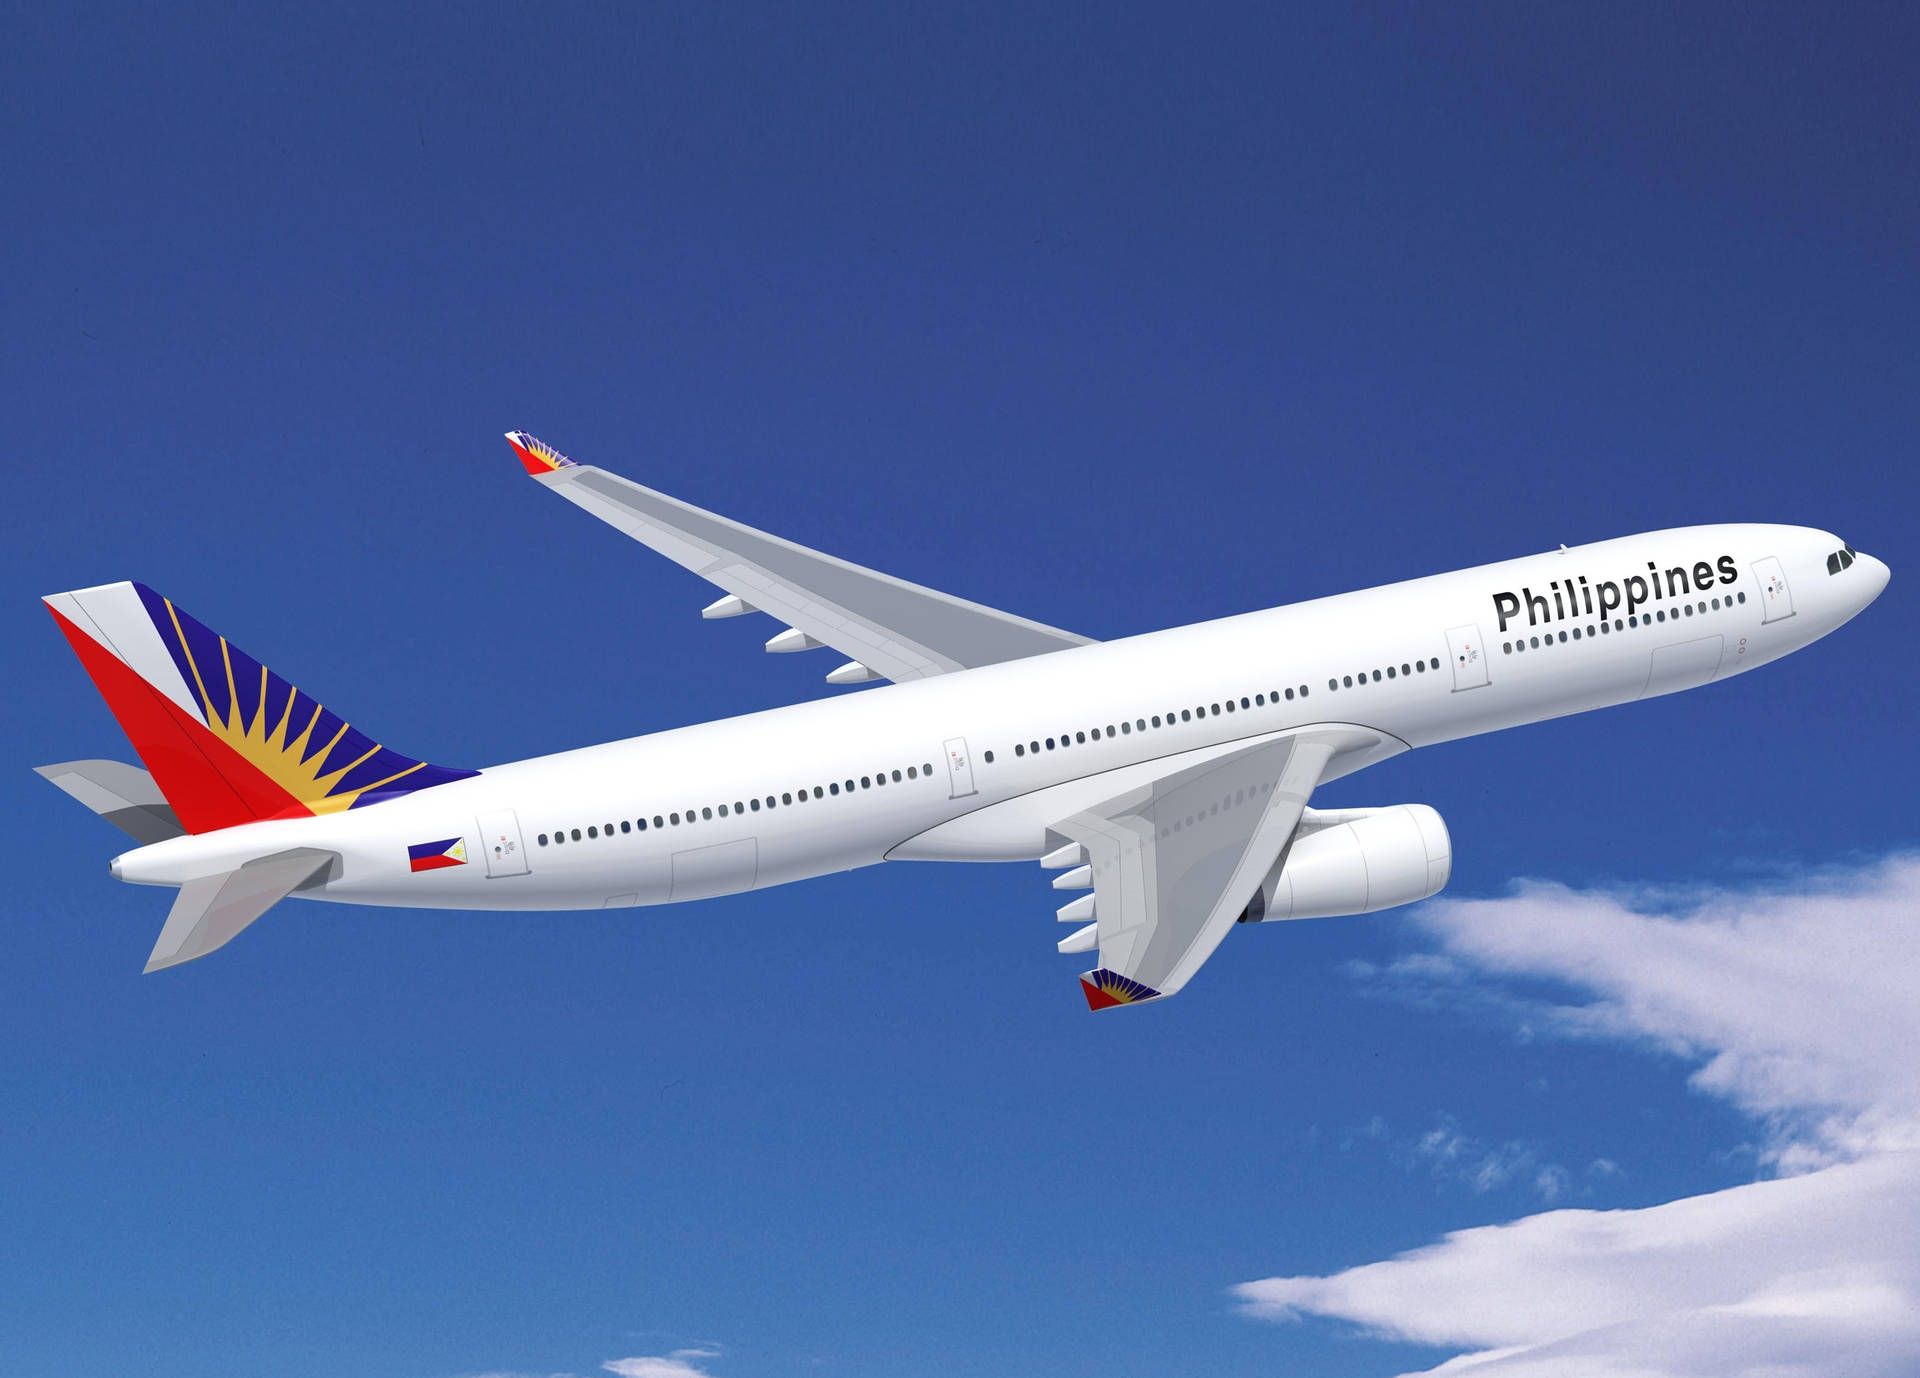 Philippine Airlines Flying Airplane In The Sky Wallpaper